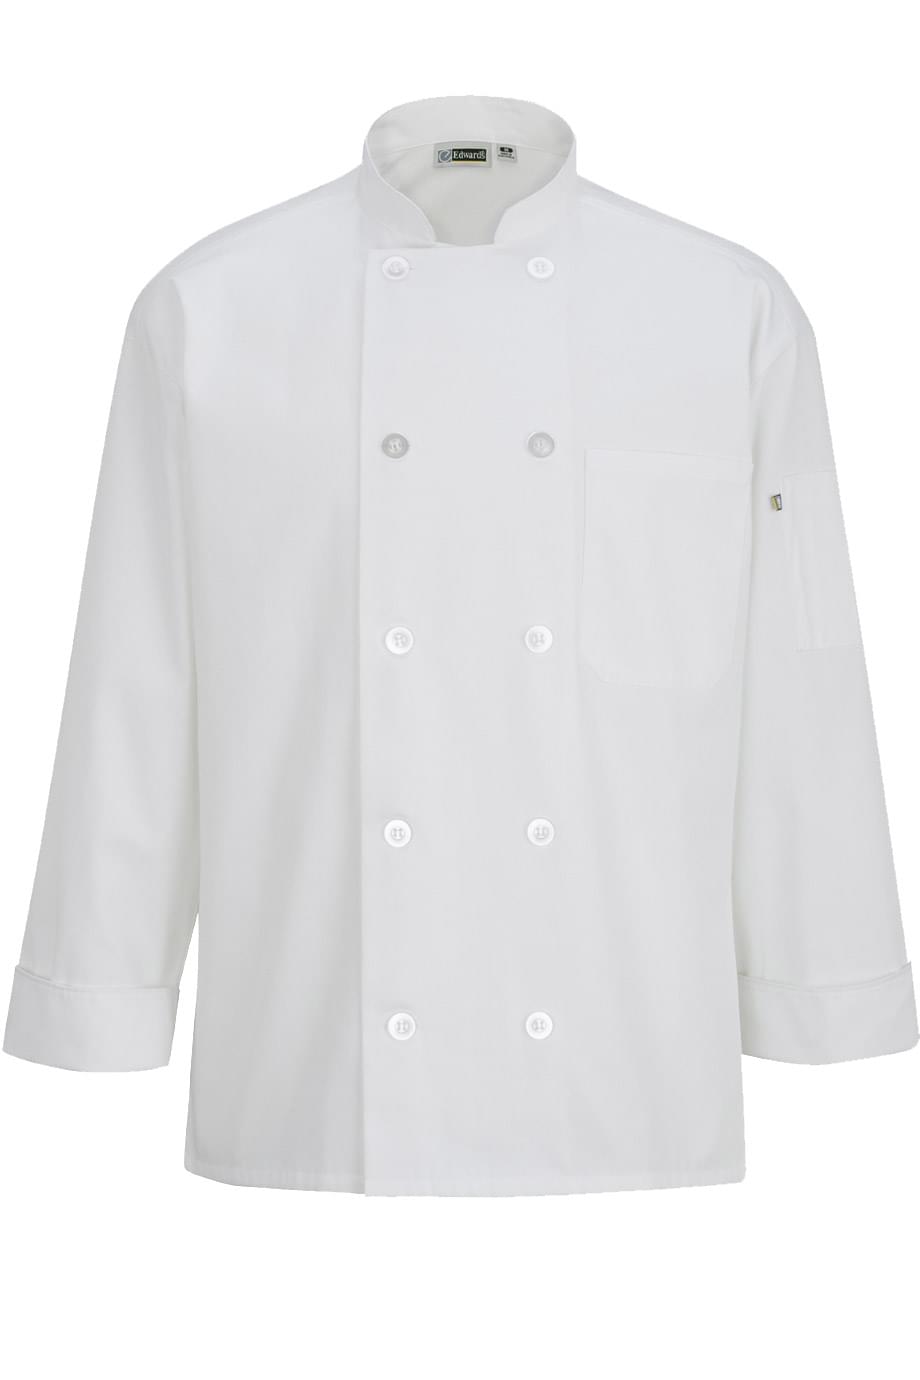 Edwards Ten Button Chef Coat With Back Mesh 